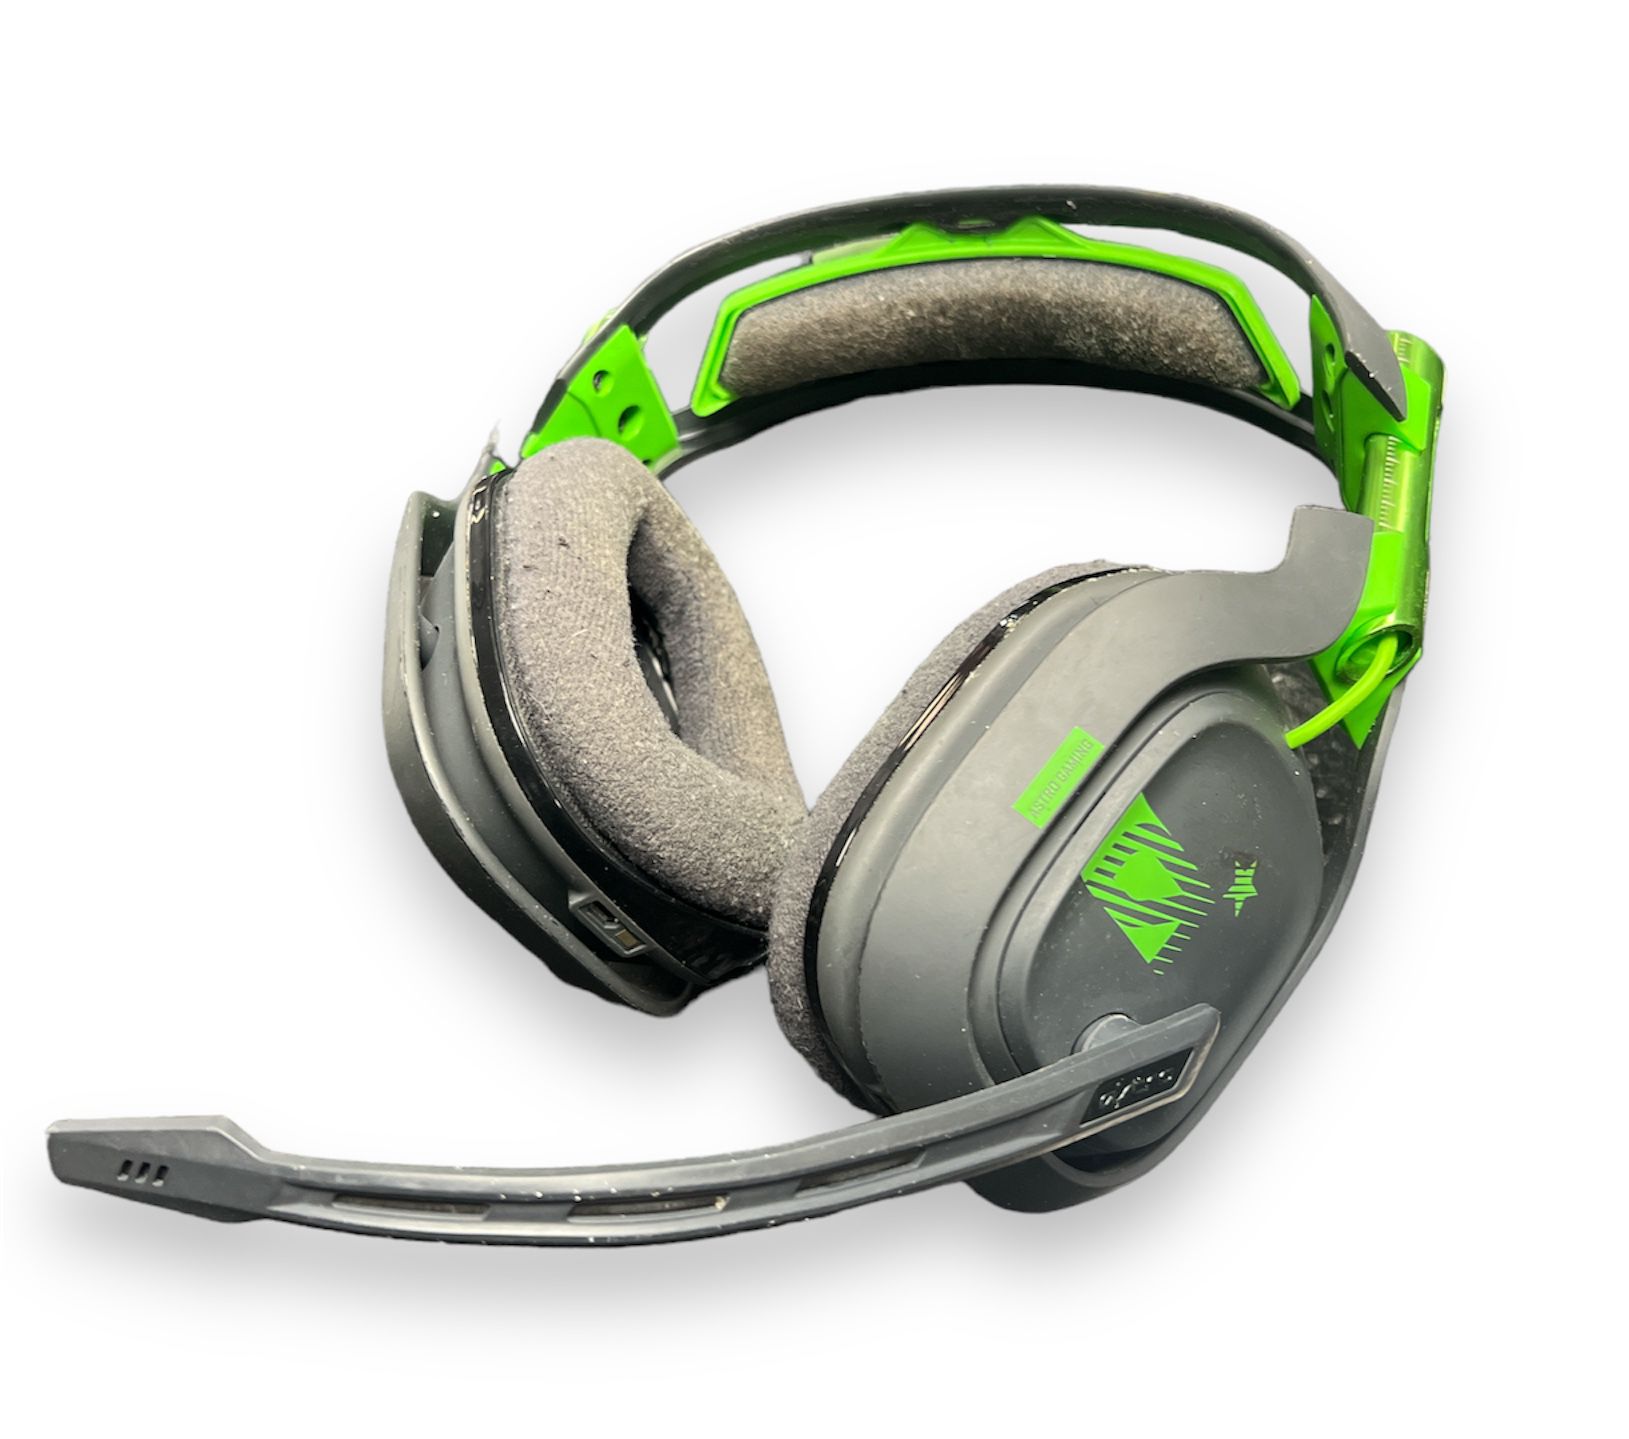 Astro A50 headset